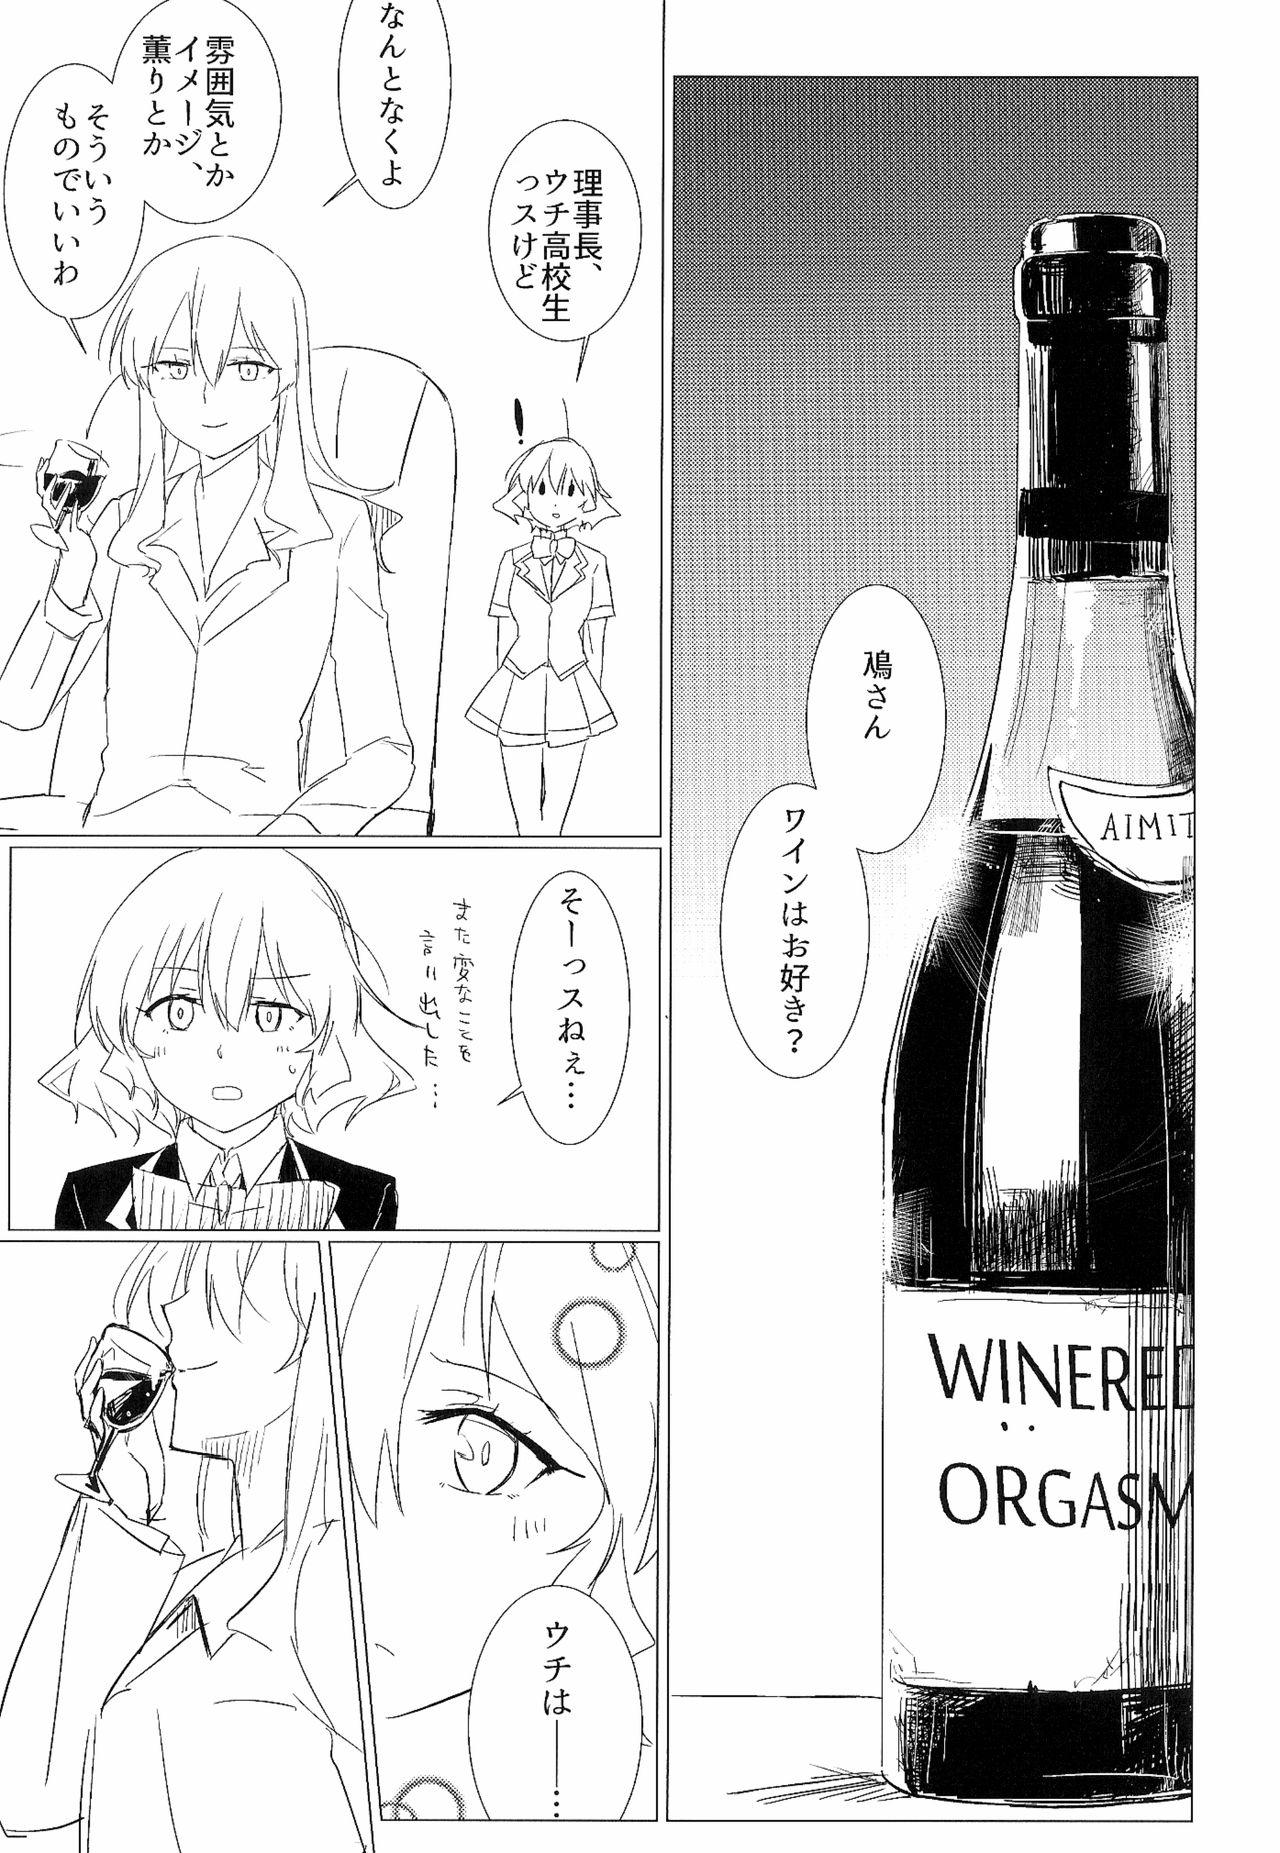 Van Wine-Red Orgasm - Akuma no riddle With - Page 3